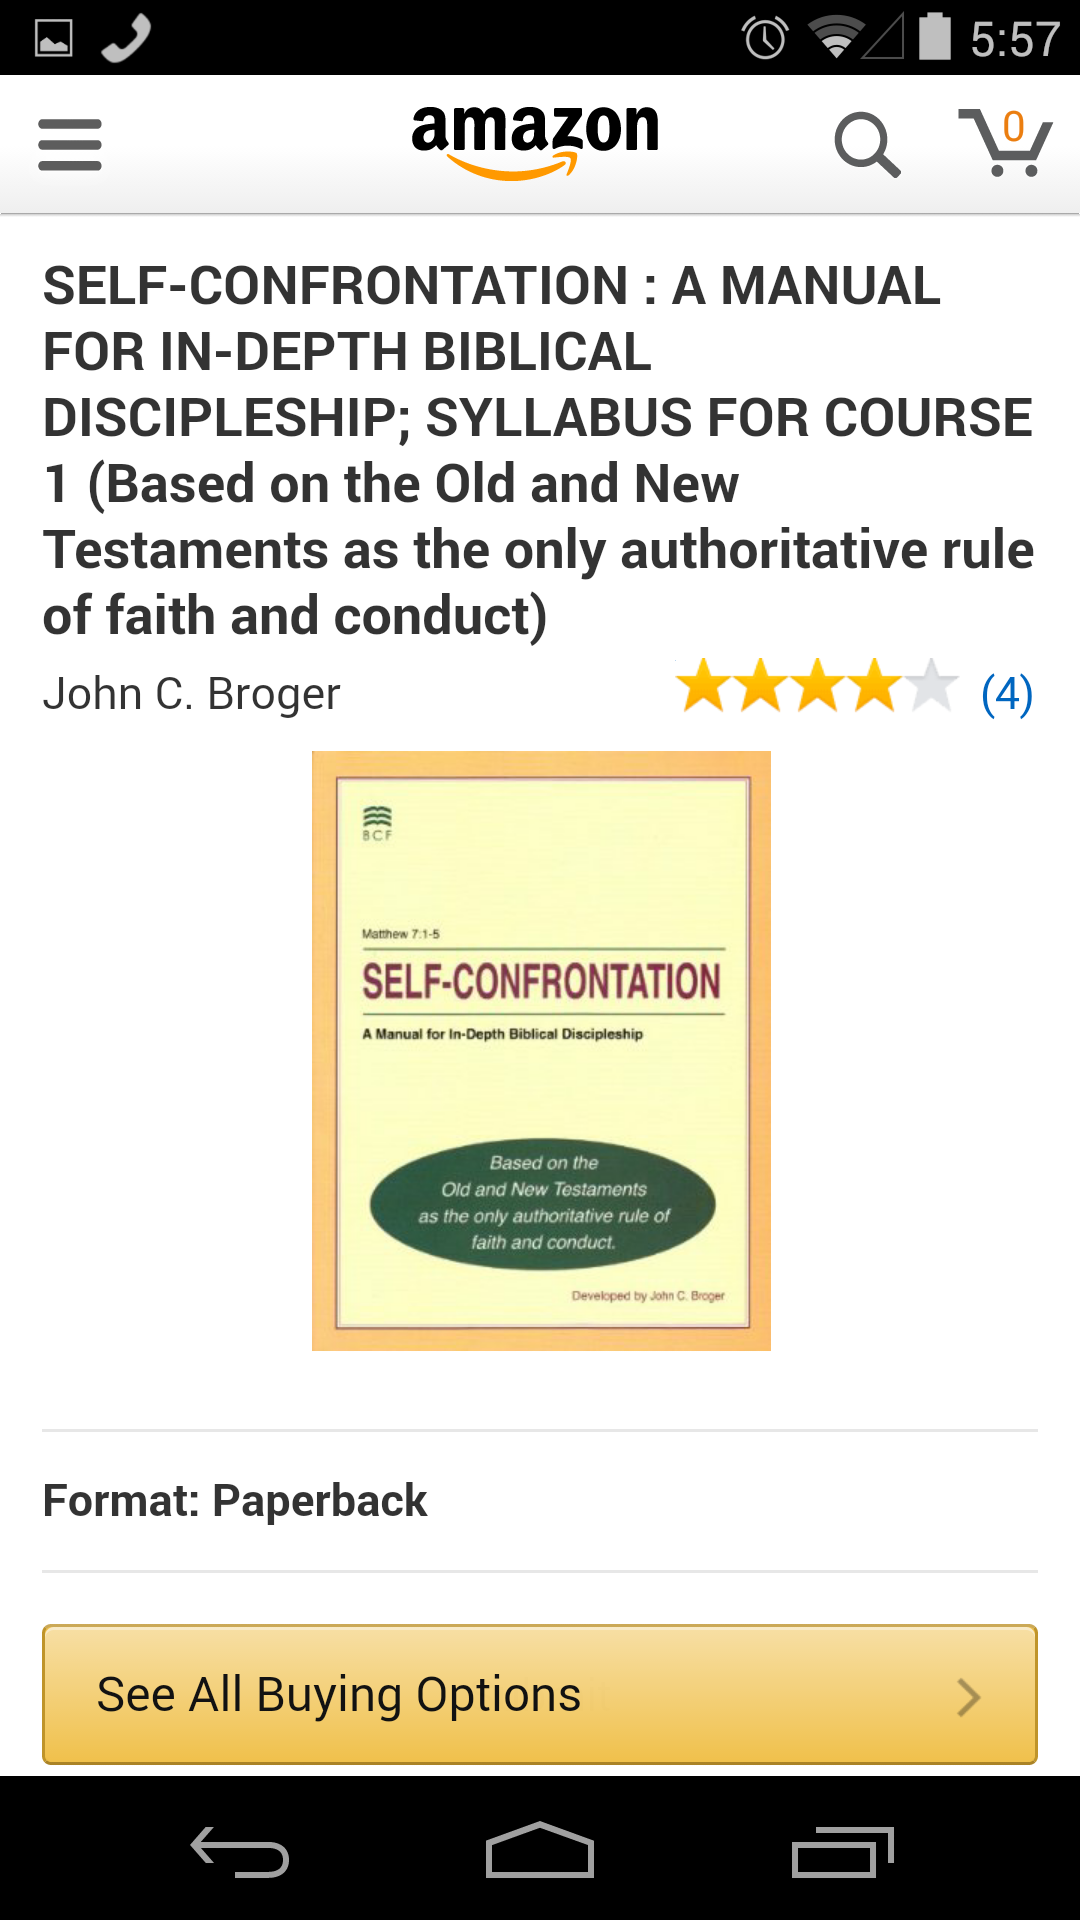 Self-confrontation a manual for in-depth biblical discipleship